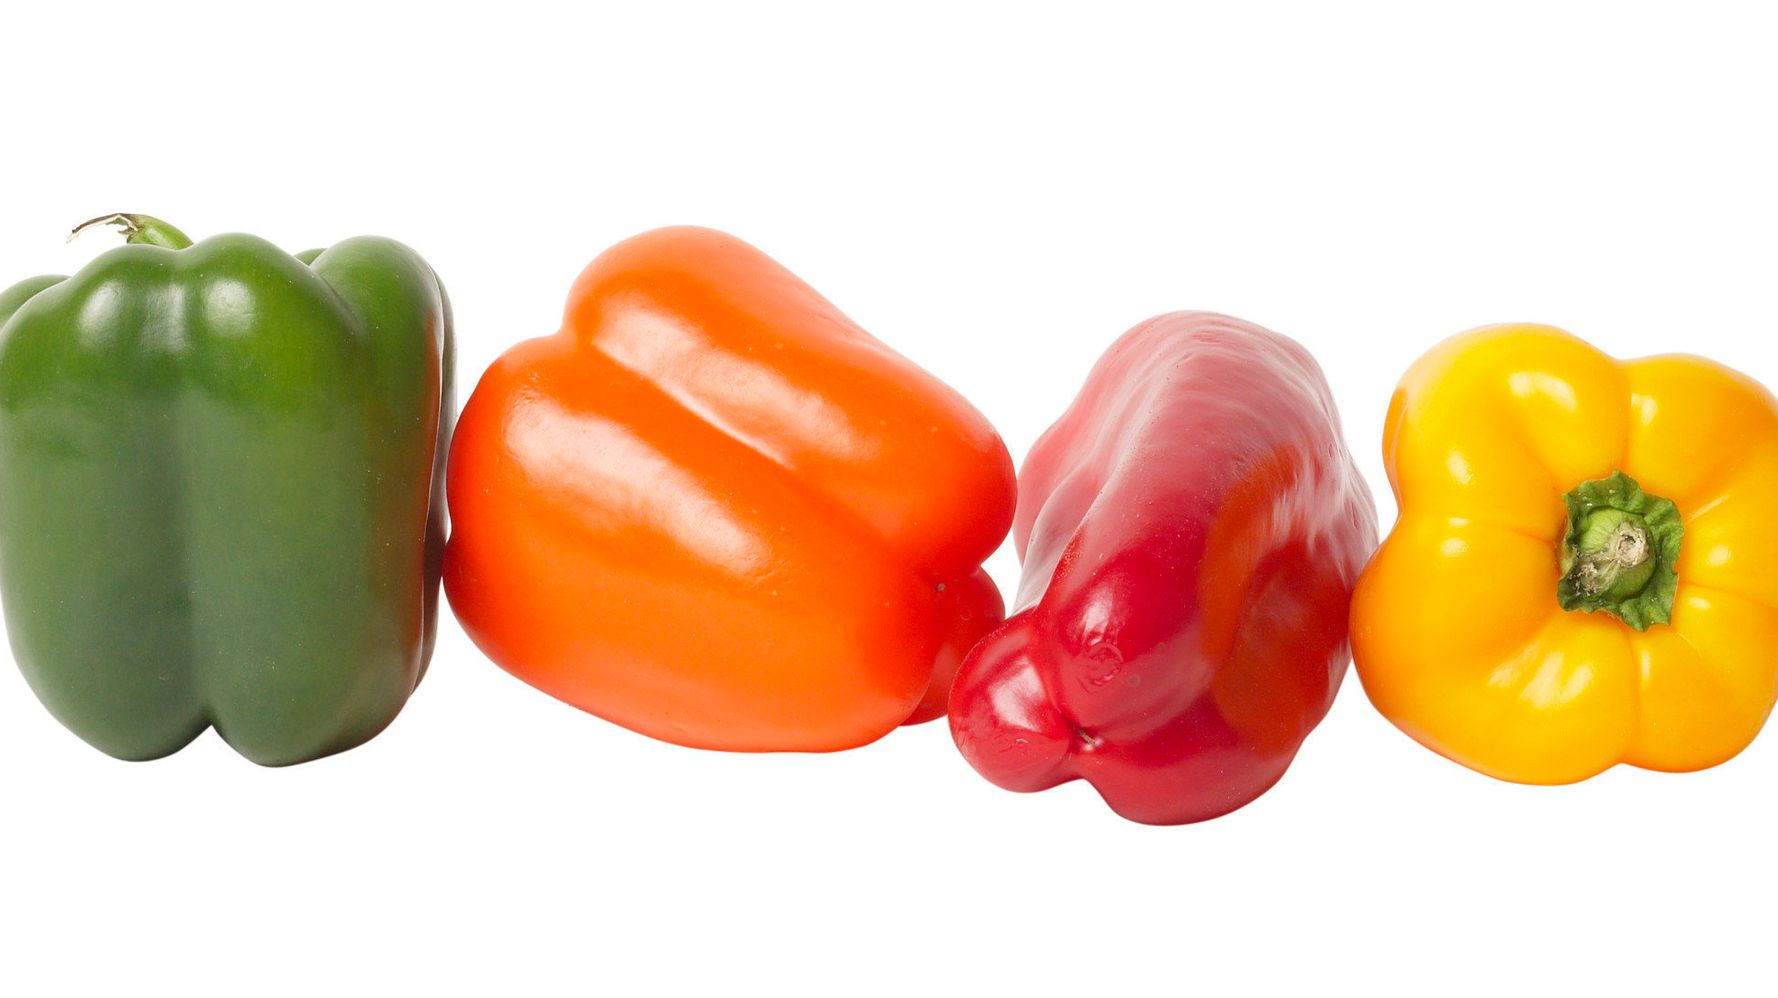 Green Bell Peppers Are Just Unripe Versions Of Red Peppers | HuffPost ...